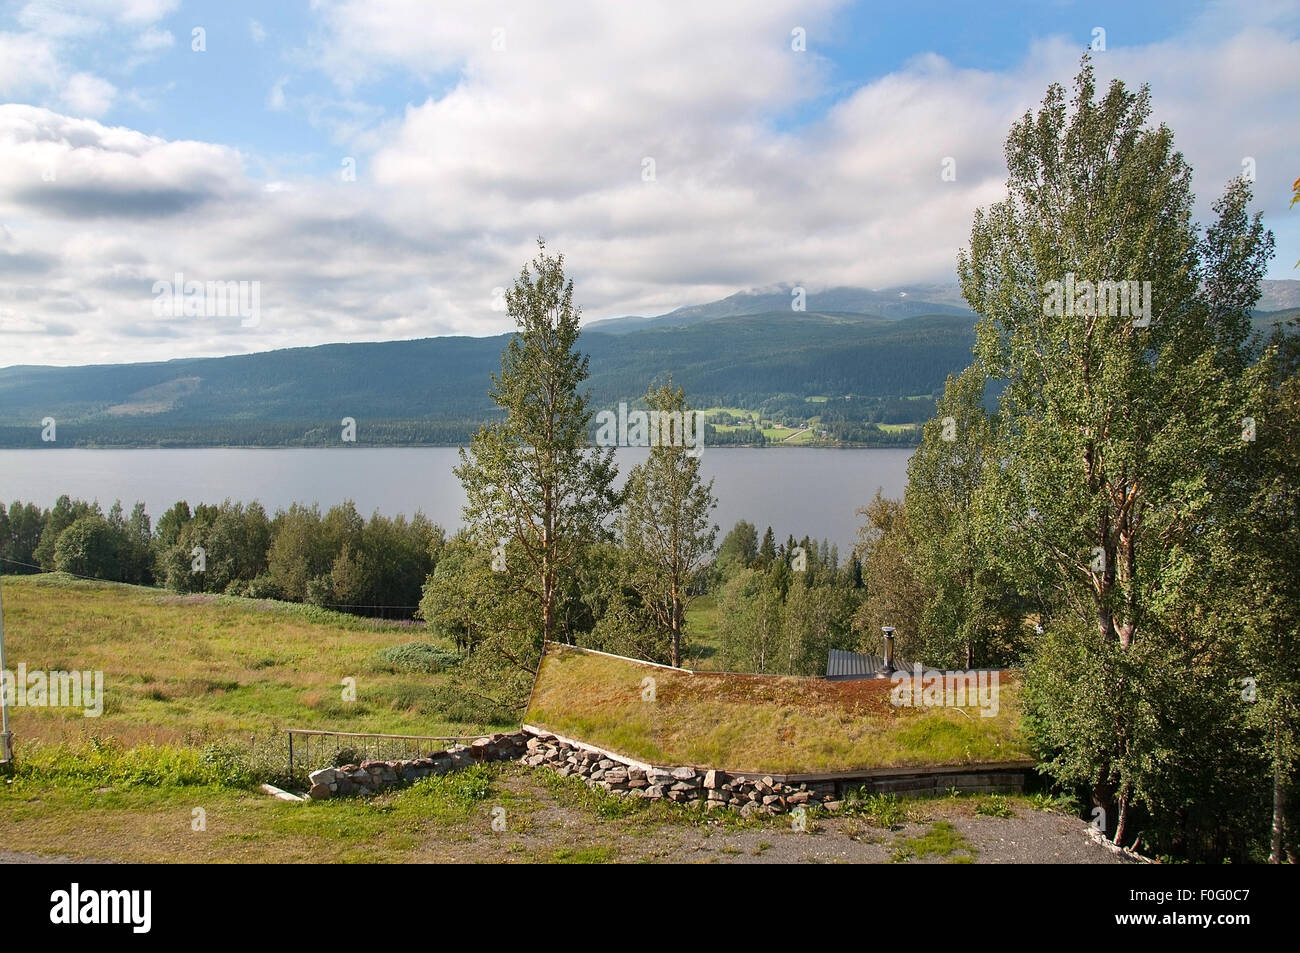 Swedish scenery. Scenic landscape near Ostersund in Northern Sweden on an overcast day. Stock Photo